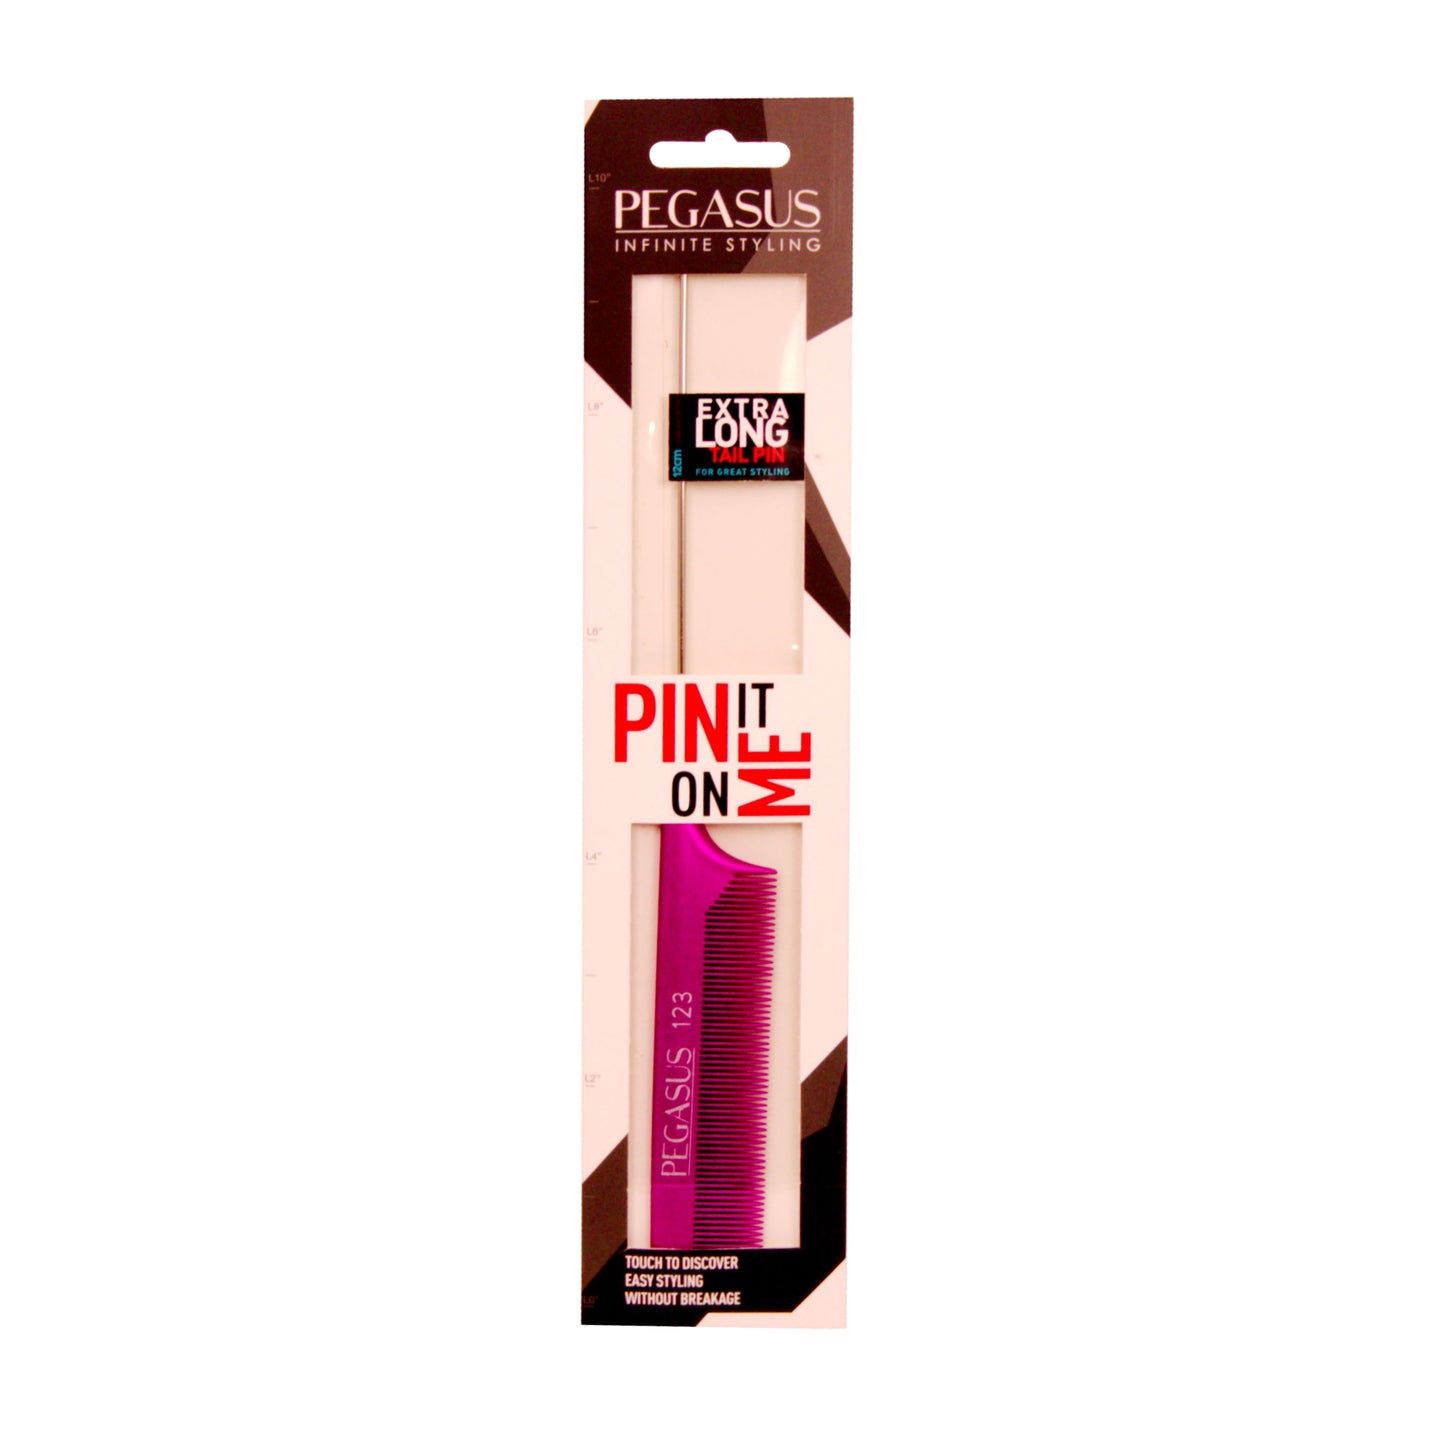 Pegasus MICOLOR 123, 9.75in Hard Rubber Fine Tooth Pintail Comb, Seamless, Anti Static, Heat and Chemically Resistant, Stainless Steel Pin, Great for Parting, Coloring Hair | Peines de goma dura - Pink